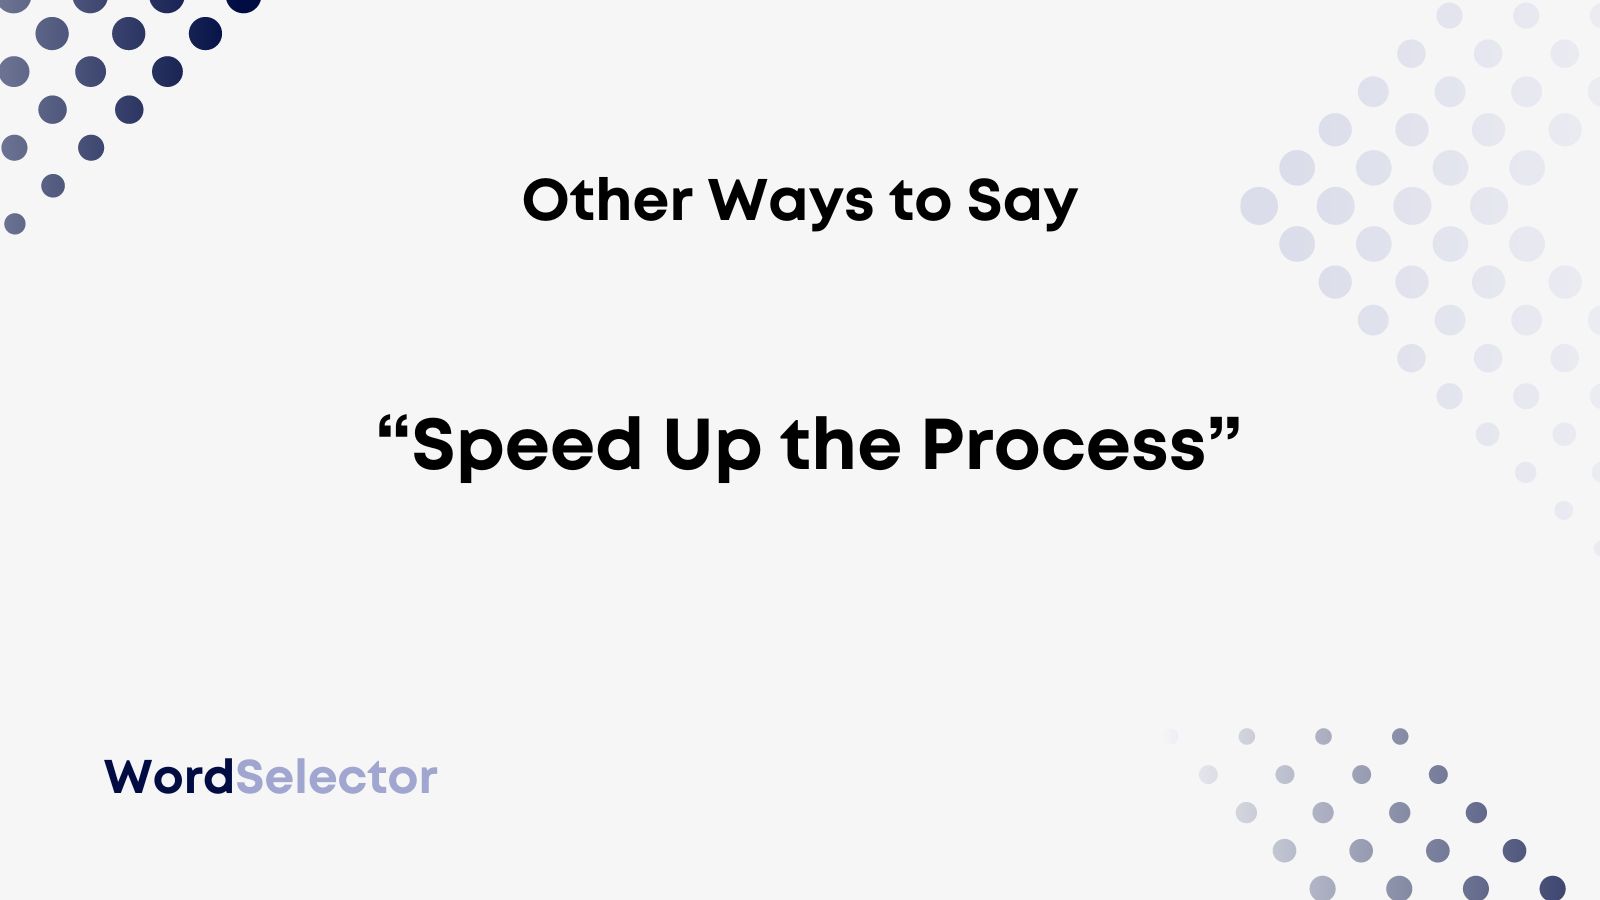 https://wordselector.com/wp-content/uploads/2023/03/Other-Ways-to-Say-Speed-Up-the-Process.jpg